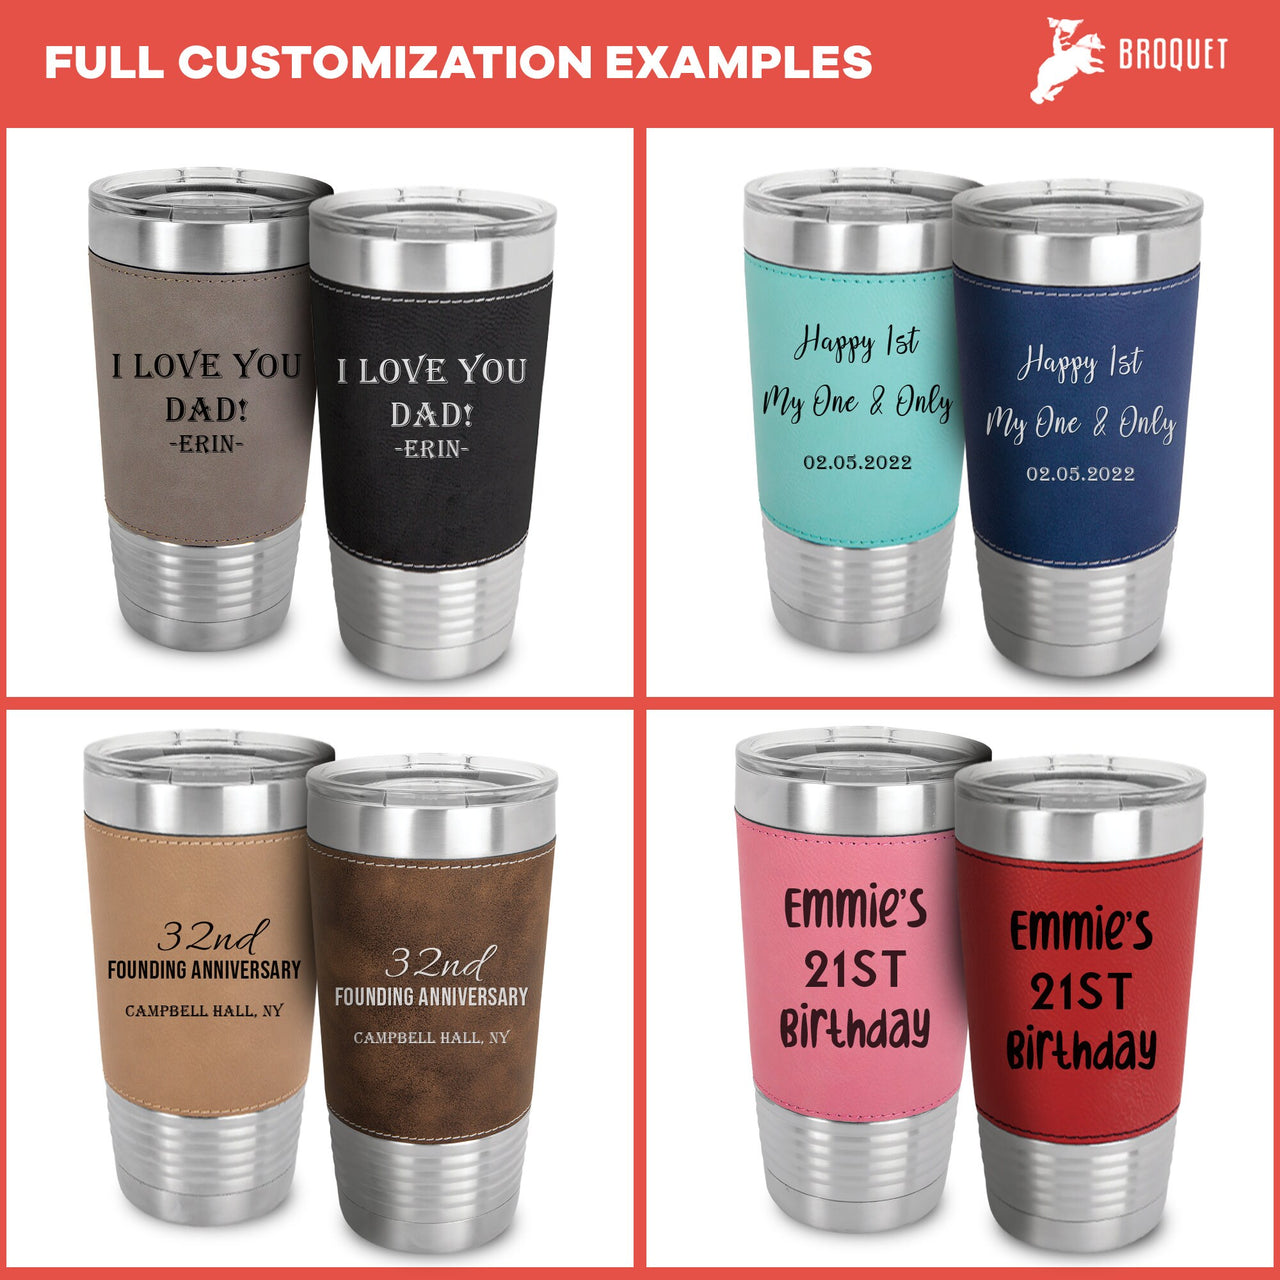 Premium Quality Personalized Your Text Tumbler, Custom Insulated Tumbler, Custom Text, Bridesmaid Proposal, Bridesmaid Gift, Christmas gift